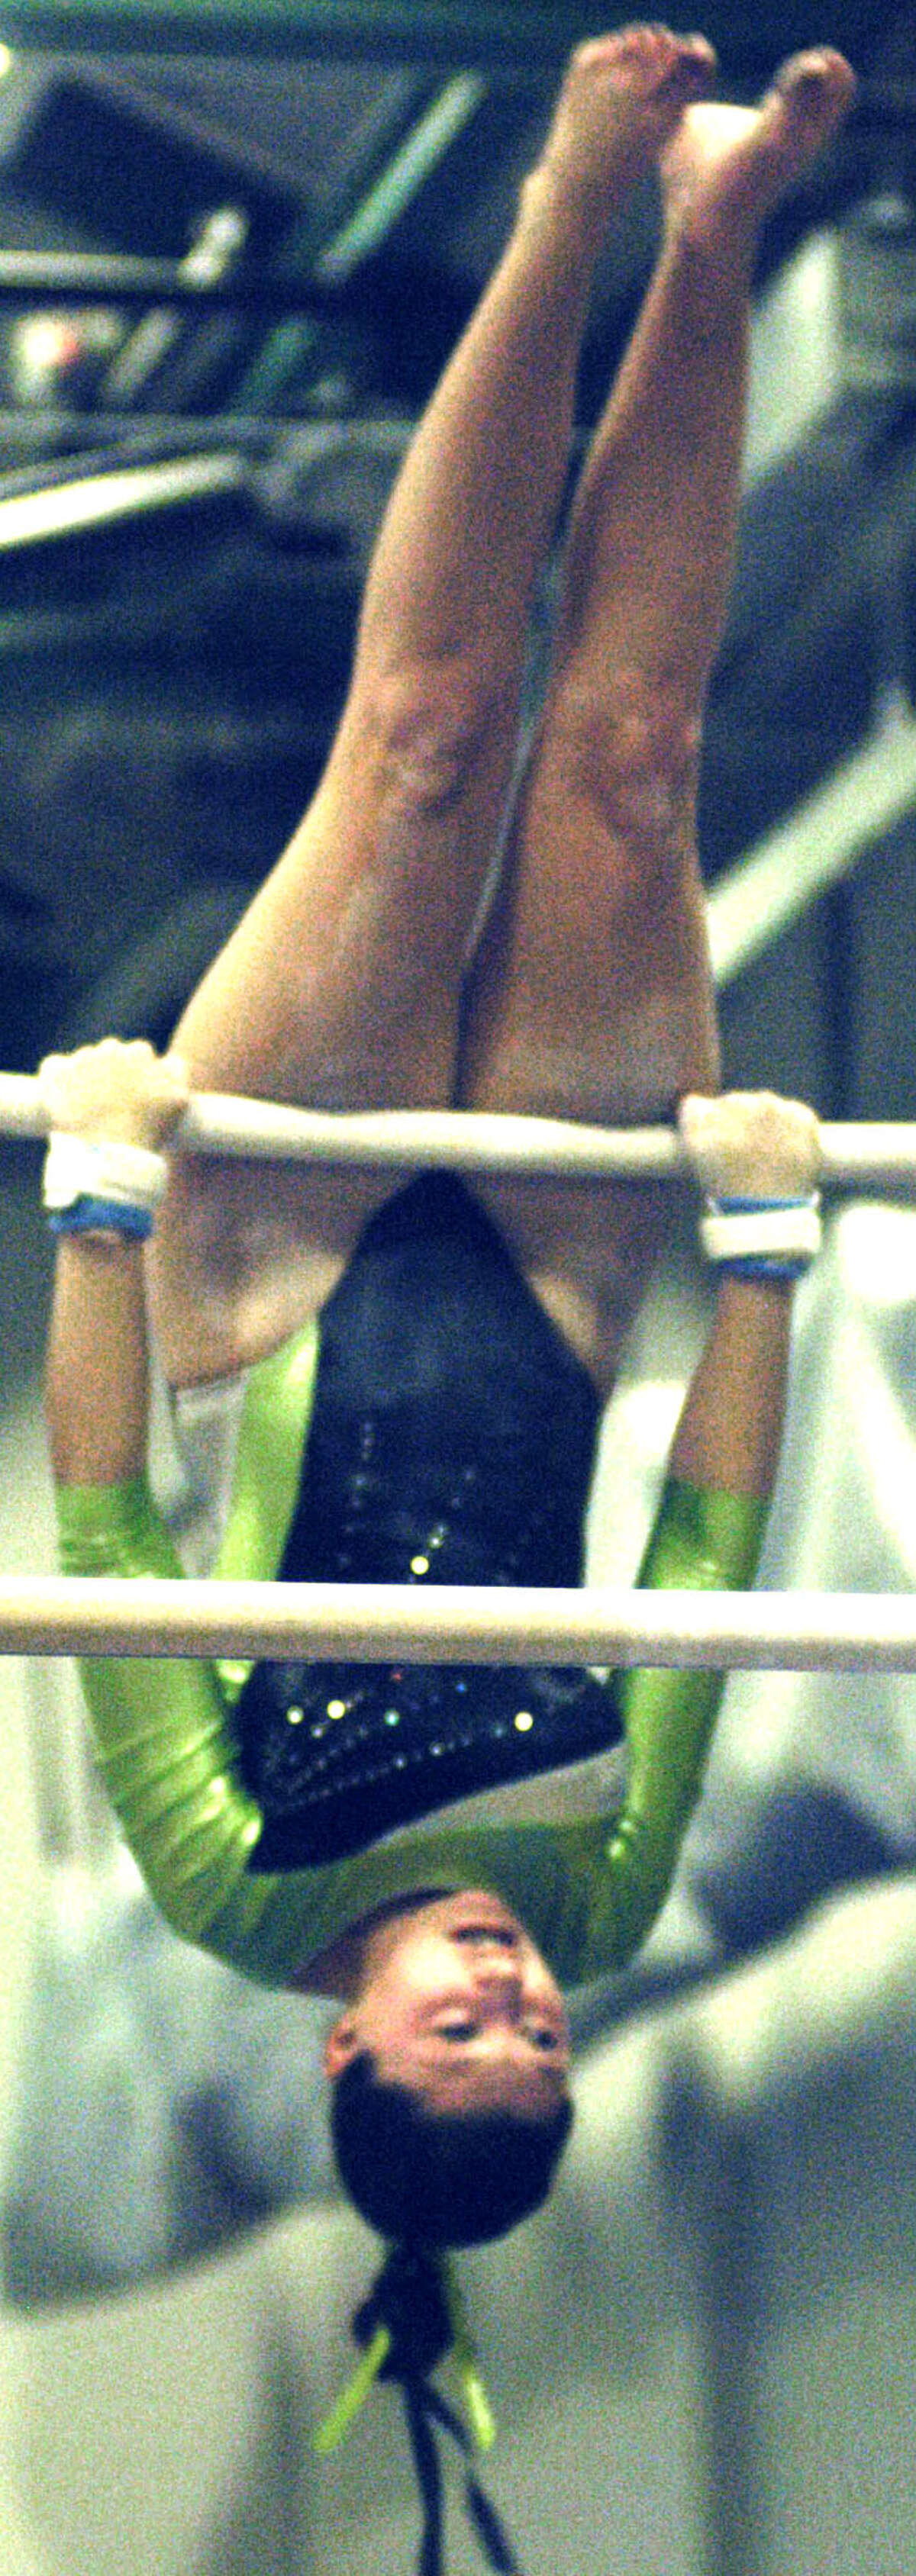 Julia Krier of the Green Wave competes on the uneven bars during a New Milford High School gymnastics meet vs. Oxford and Newtown at NMHS, Jan. 25, 2013